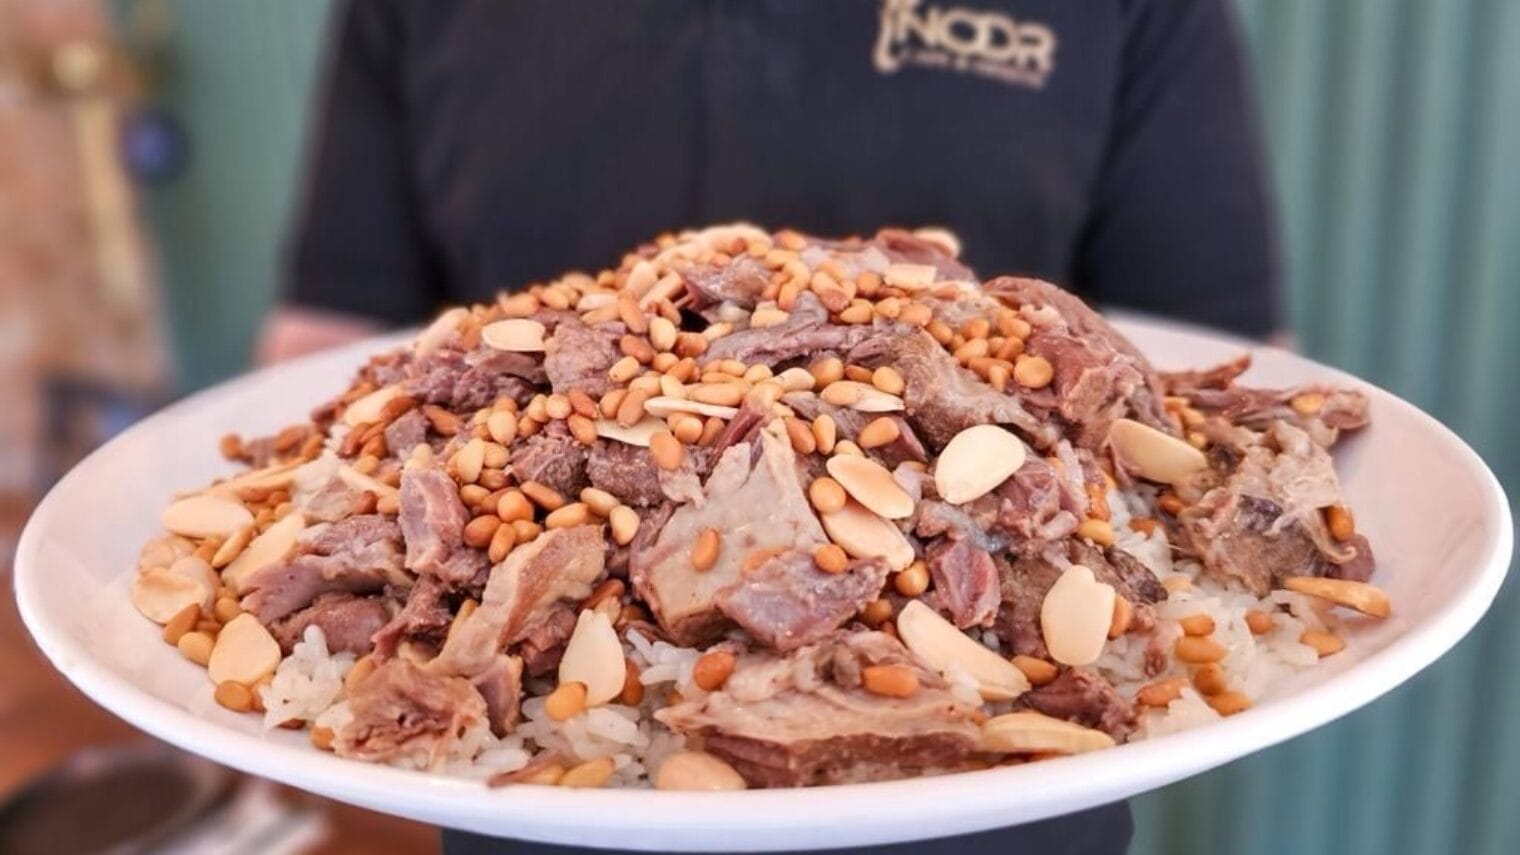 A classic Druze dish served up at Noor in Julis is now kosher. Photo © Ziv Barak